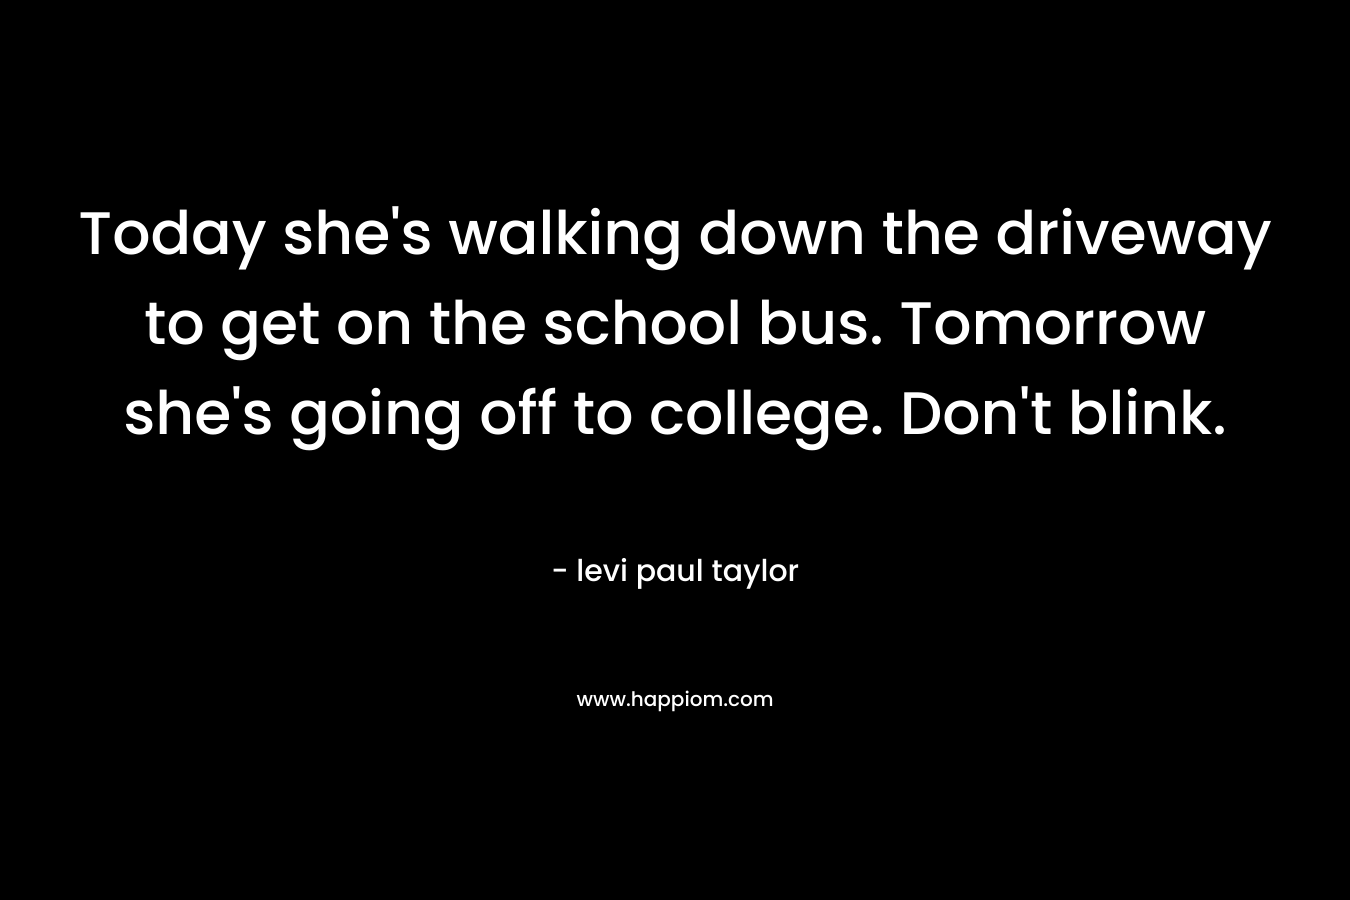 Today she’s walking down the driveway to get on the school bus. Tomorrow she’s going off to college. Don’t blink. – levi paul taylor